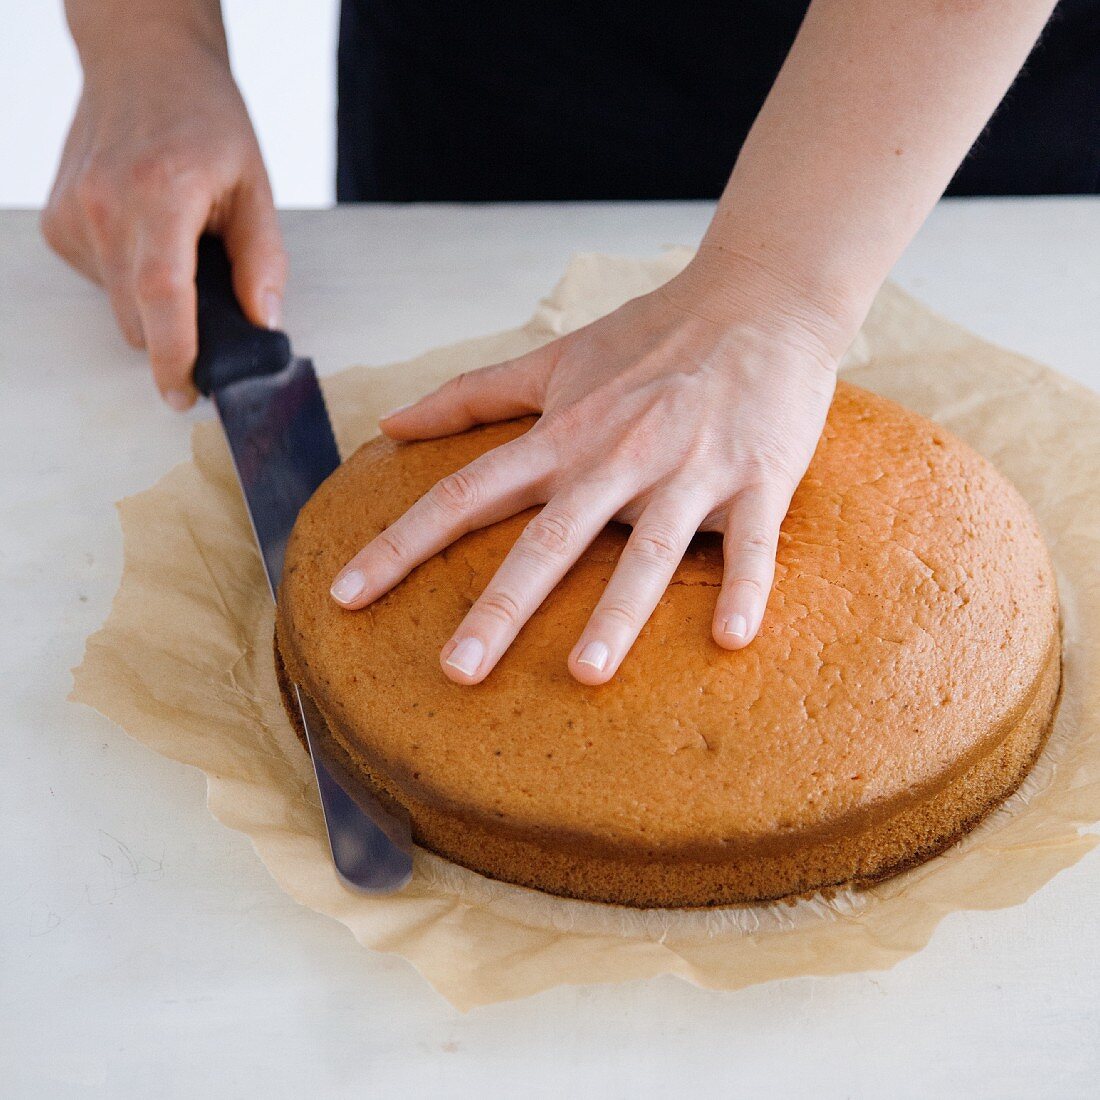 A cake being cut into two halves